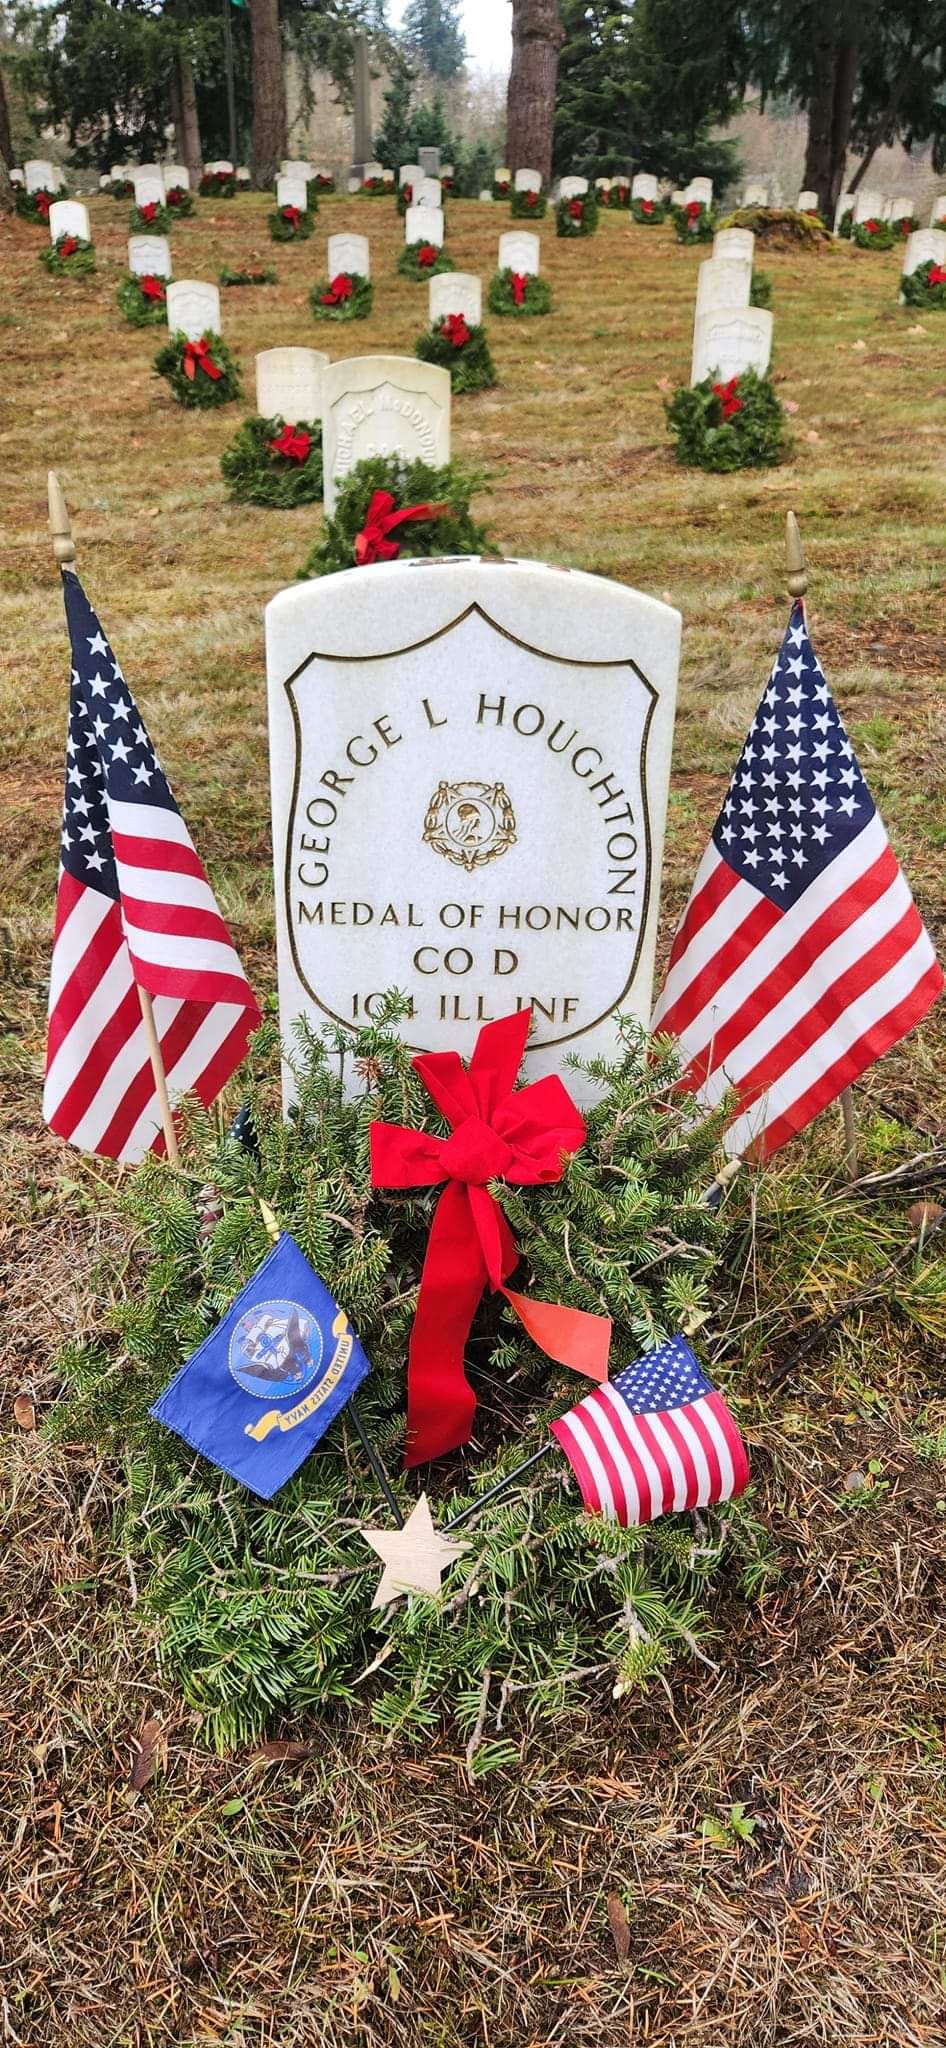 A Wreath was laid at the final resting place of SGT George Houghton,  Medal of Honor Recipient of the Civil War, on Saturday,  December 17th,  2022.